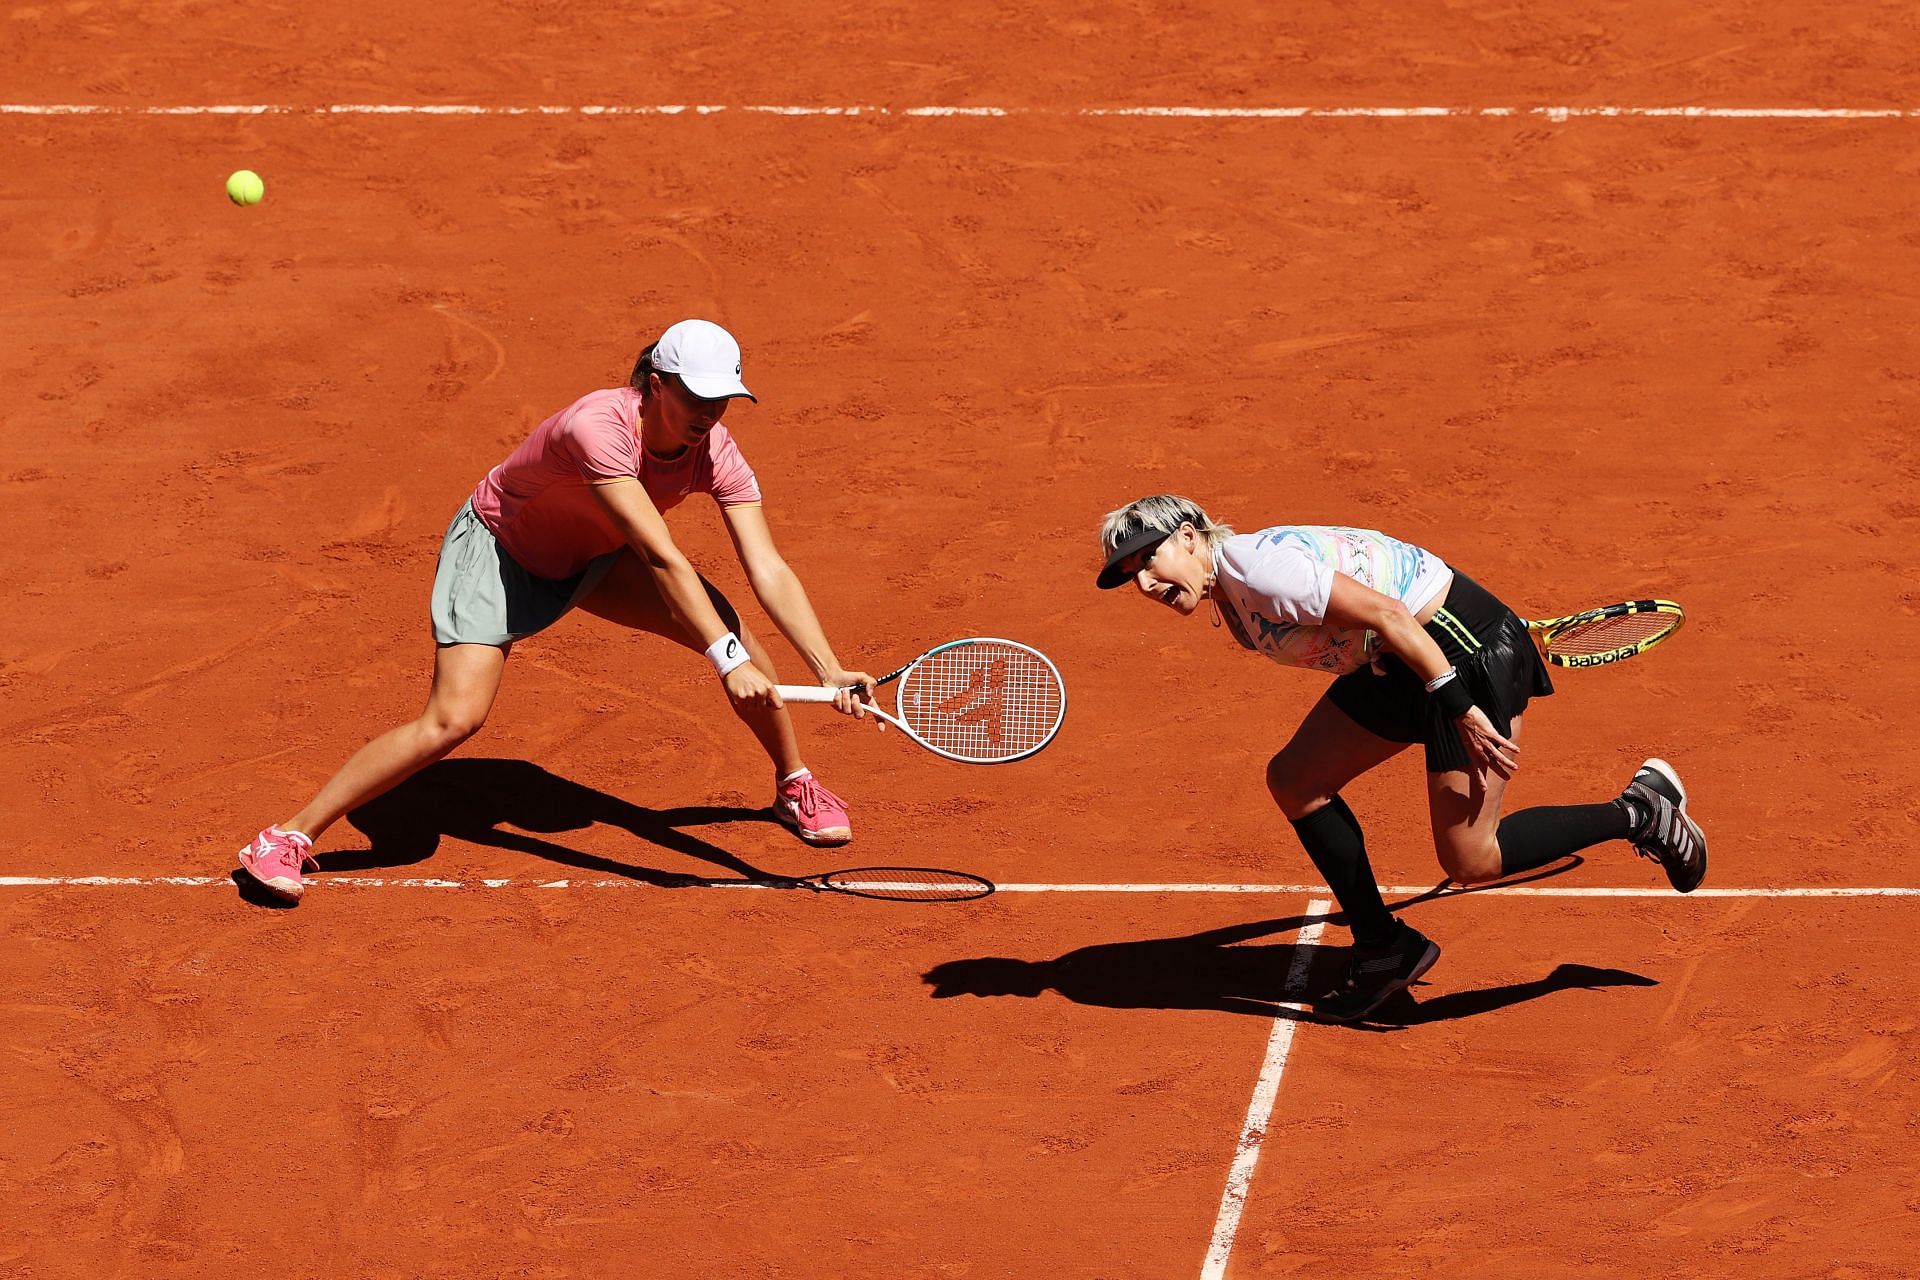 Iga Swiatek with Bethanie Mattek-Sands at the French Open 2021